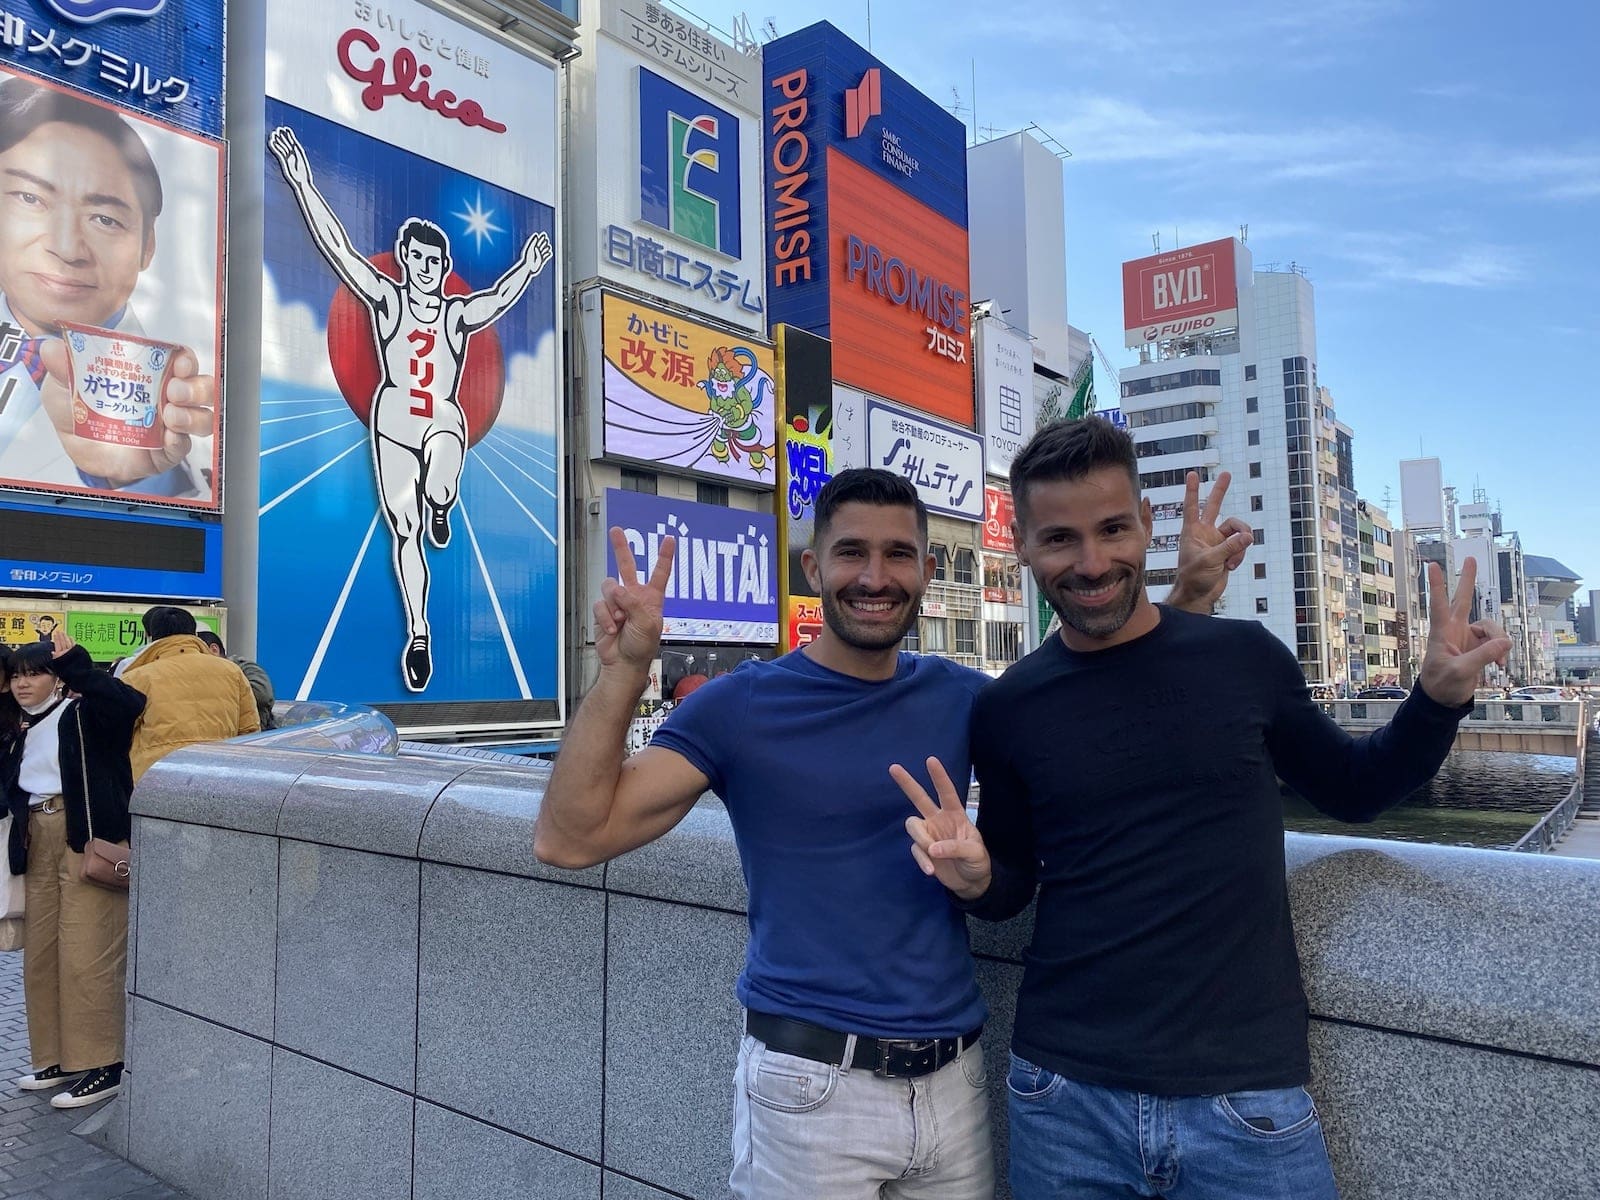 Gay travel bloggers, Nomadic Boys, give the peace sign in front of some very Japanese ads in Tokyo.